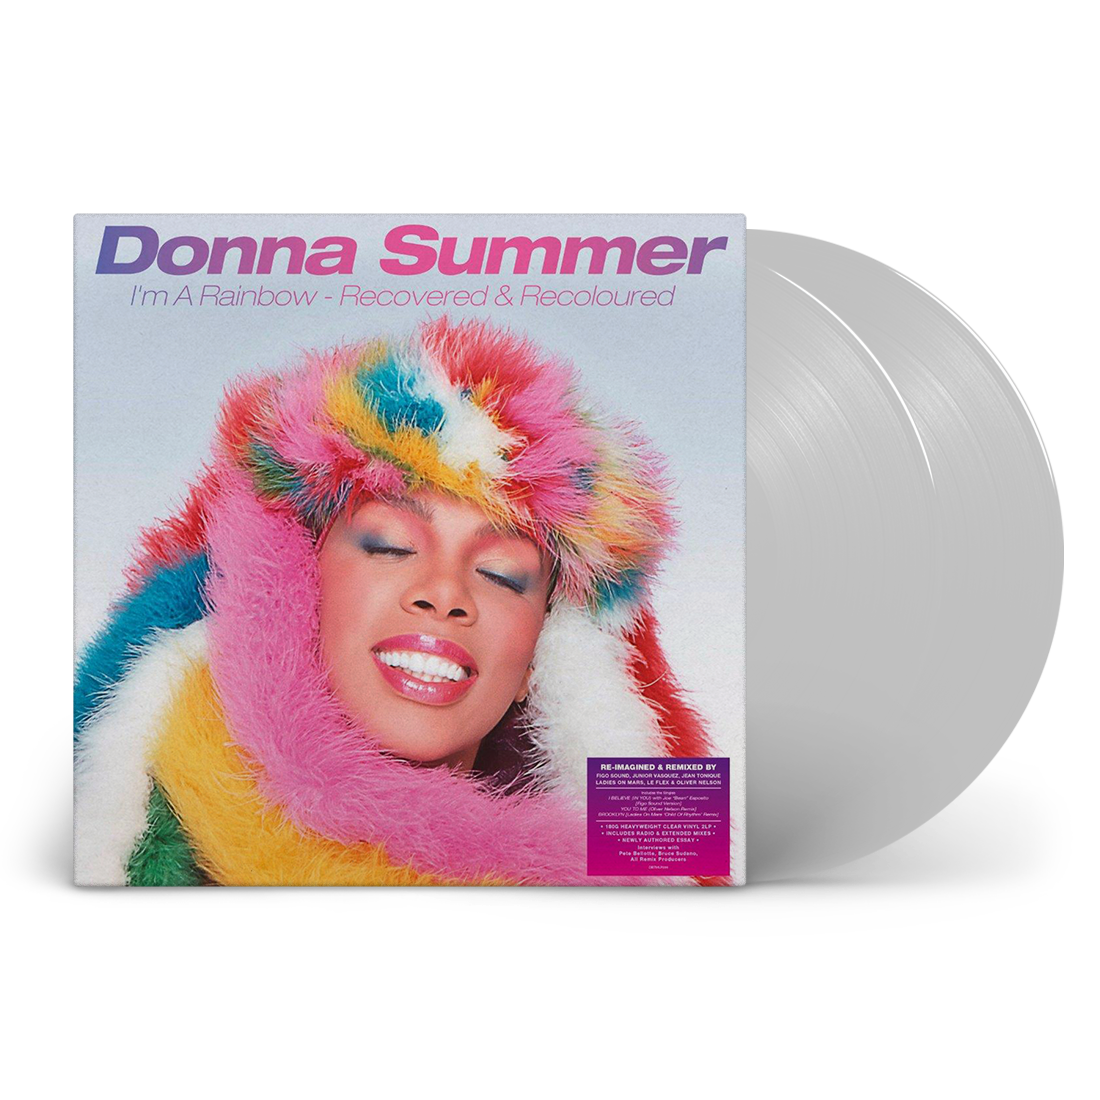 Donna Summer - I'm A Rainbow - Recovered and Recoloured: Limited Edition Clear Vinyl 2LP